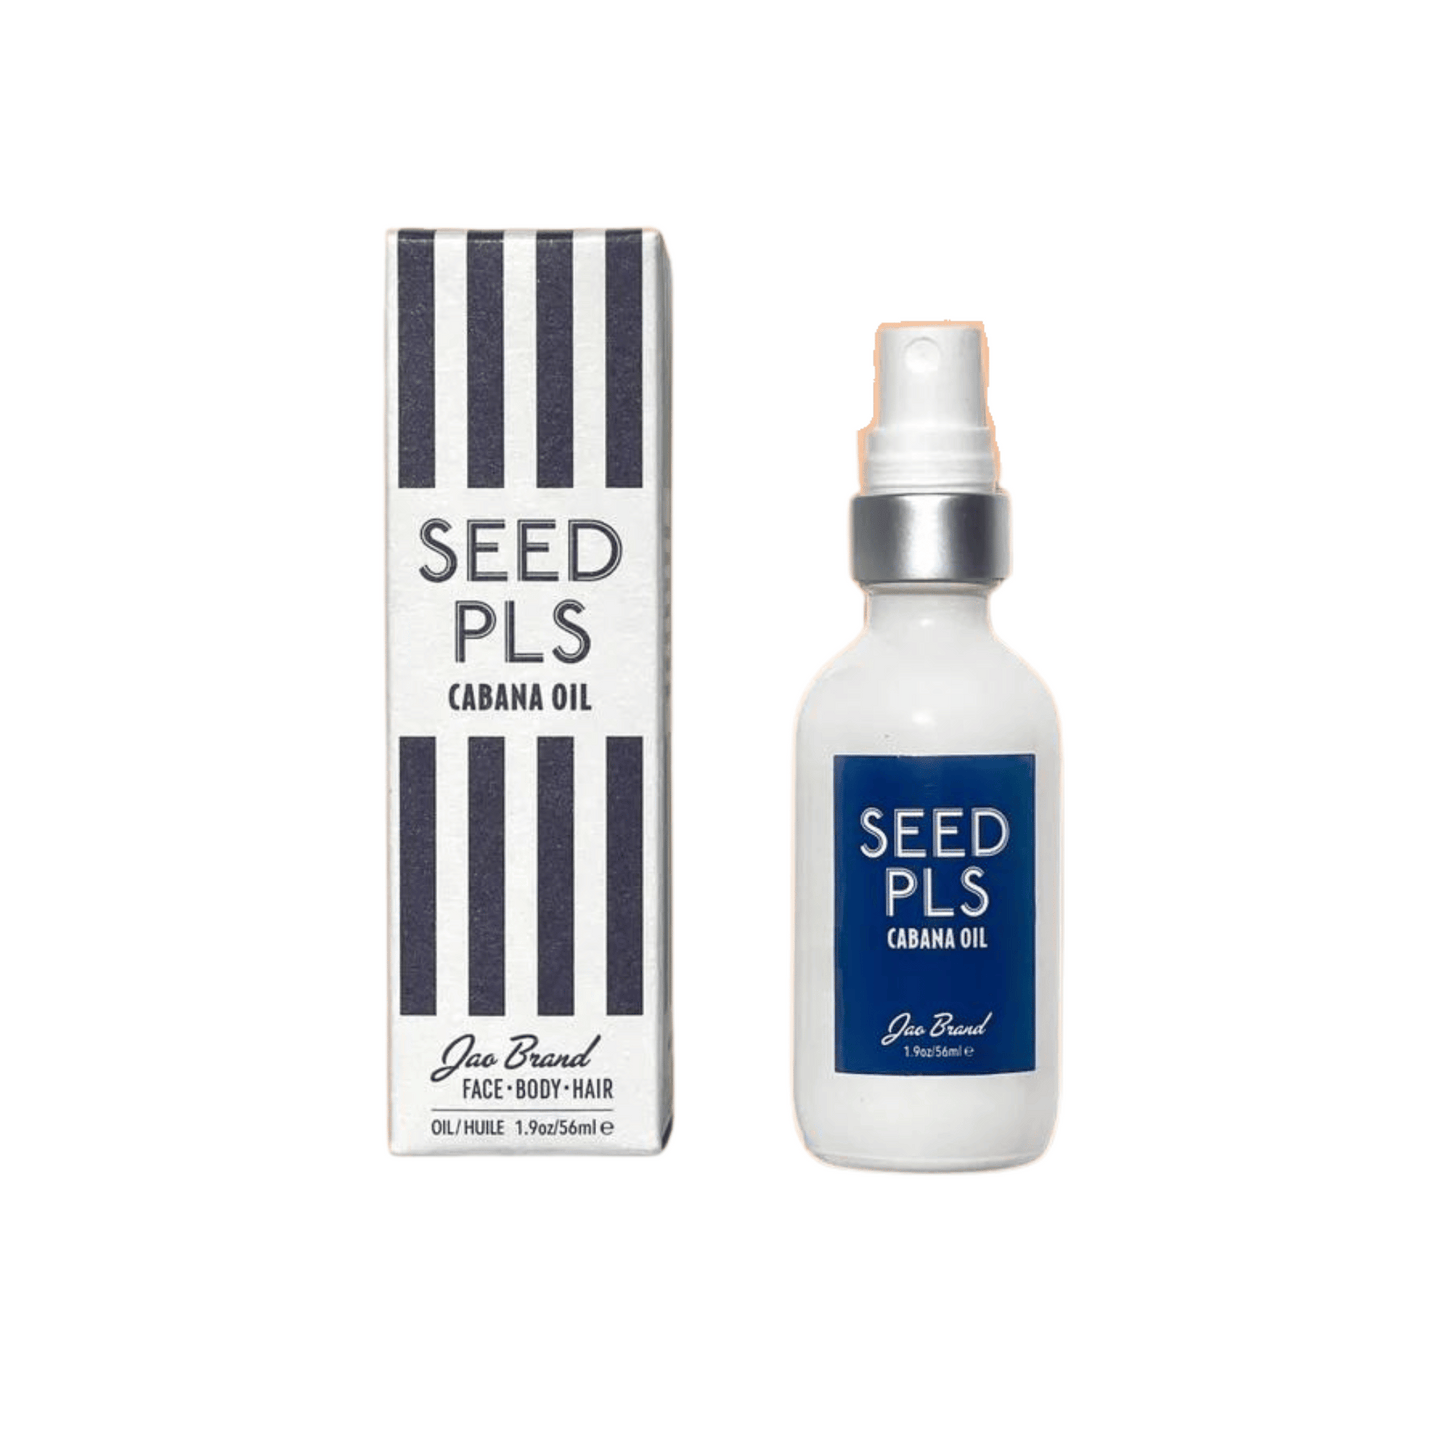 Primary Image of Seed PLS Cabana Oil